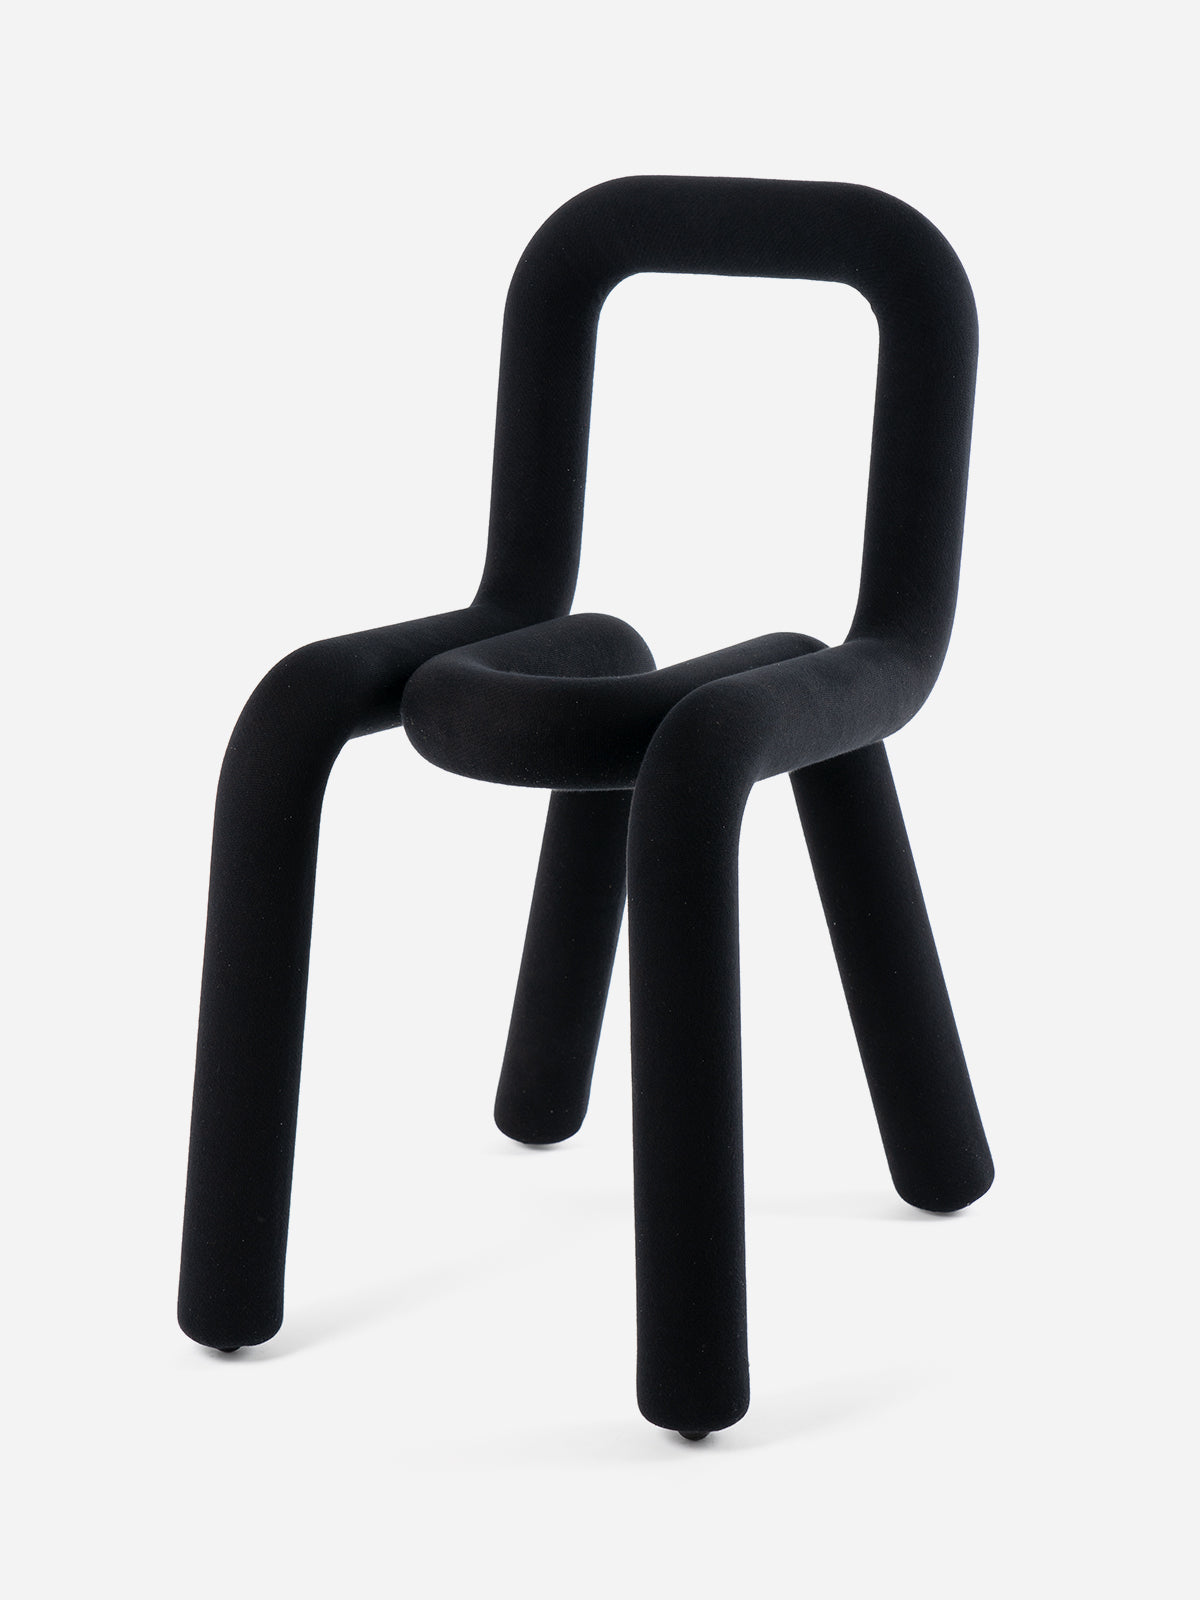 Original BOLD chair designed by the Swiss-based studio Big-Game for Moustache Editions.  Inspired by the Bauhaus classics, the Bold chair is made up of two tubular parts in metal embedded in each other, padded with foam and covered with a removable textile coating produced by a Belgium sock factory.  Collections and awards: The MoMA, Museum of Modern Art, New-York. Musée des Arts Décoratifs, Paris  Each Bold chair comes with a unique identification code and a certificate of authenticity. Made in Norway.